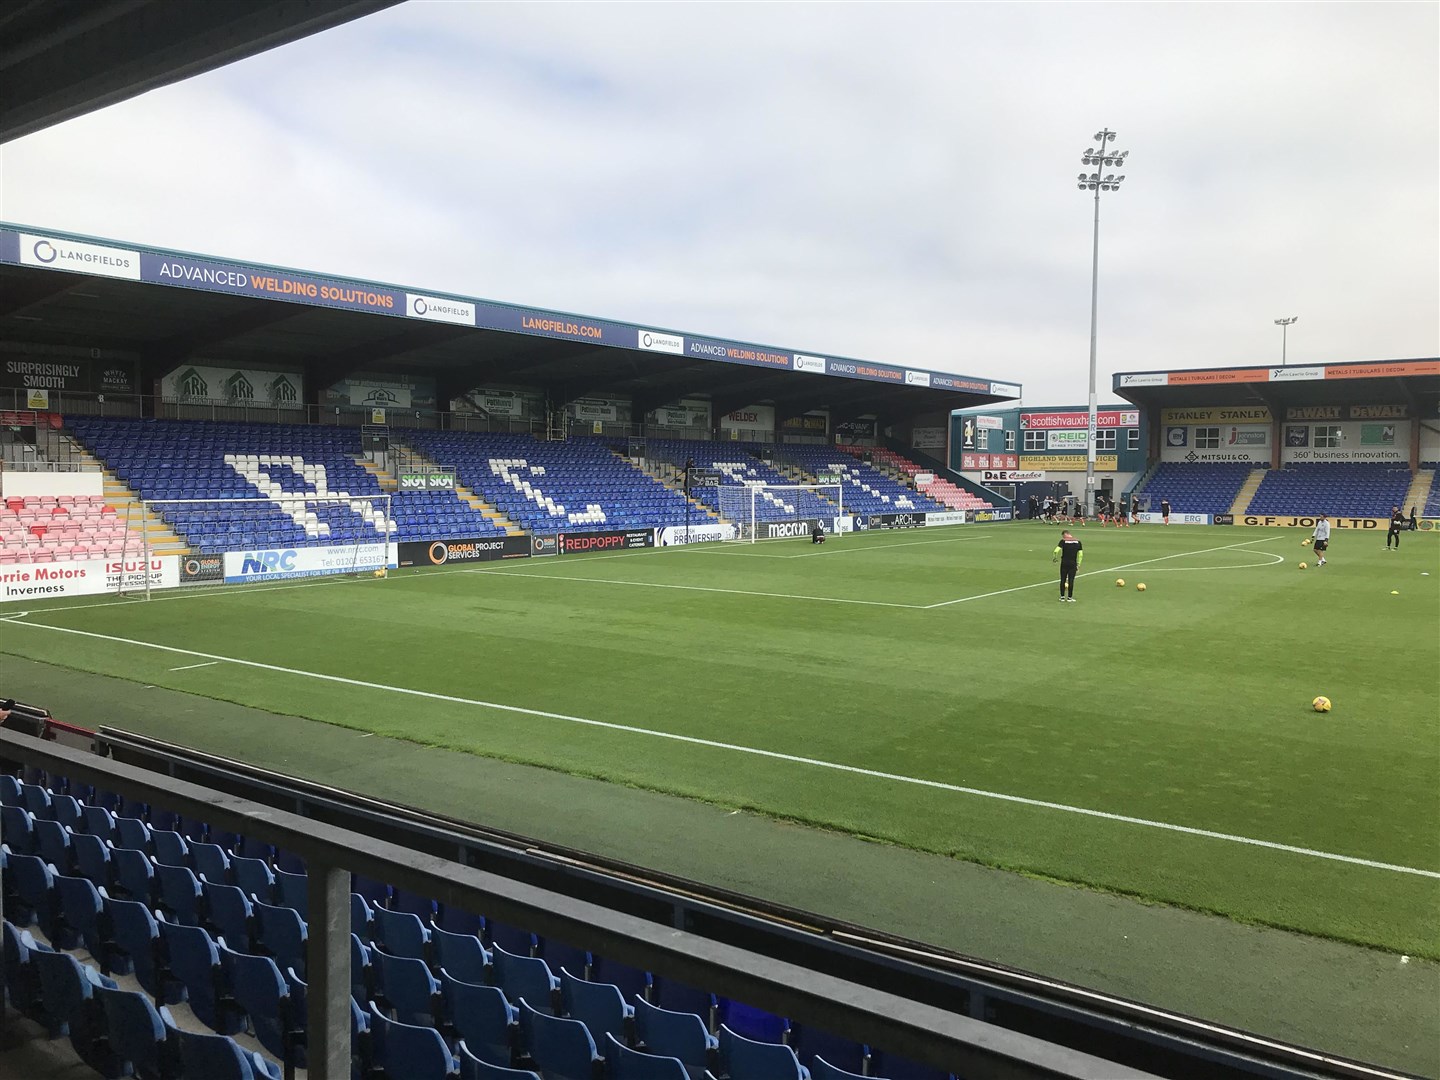 Ross County will be allowed 300 fans into the stadium. Picture: Will Clark